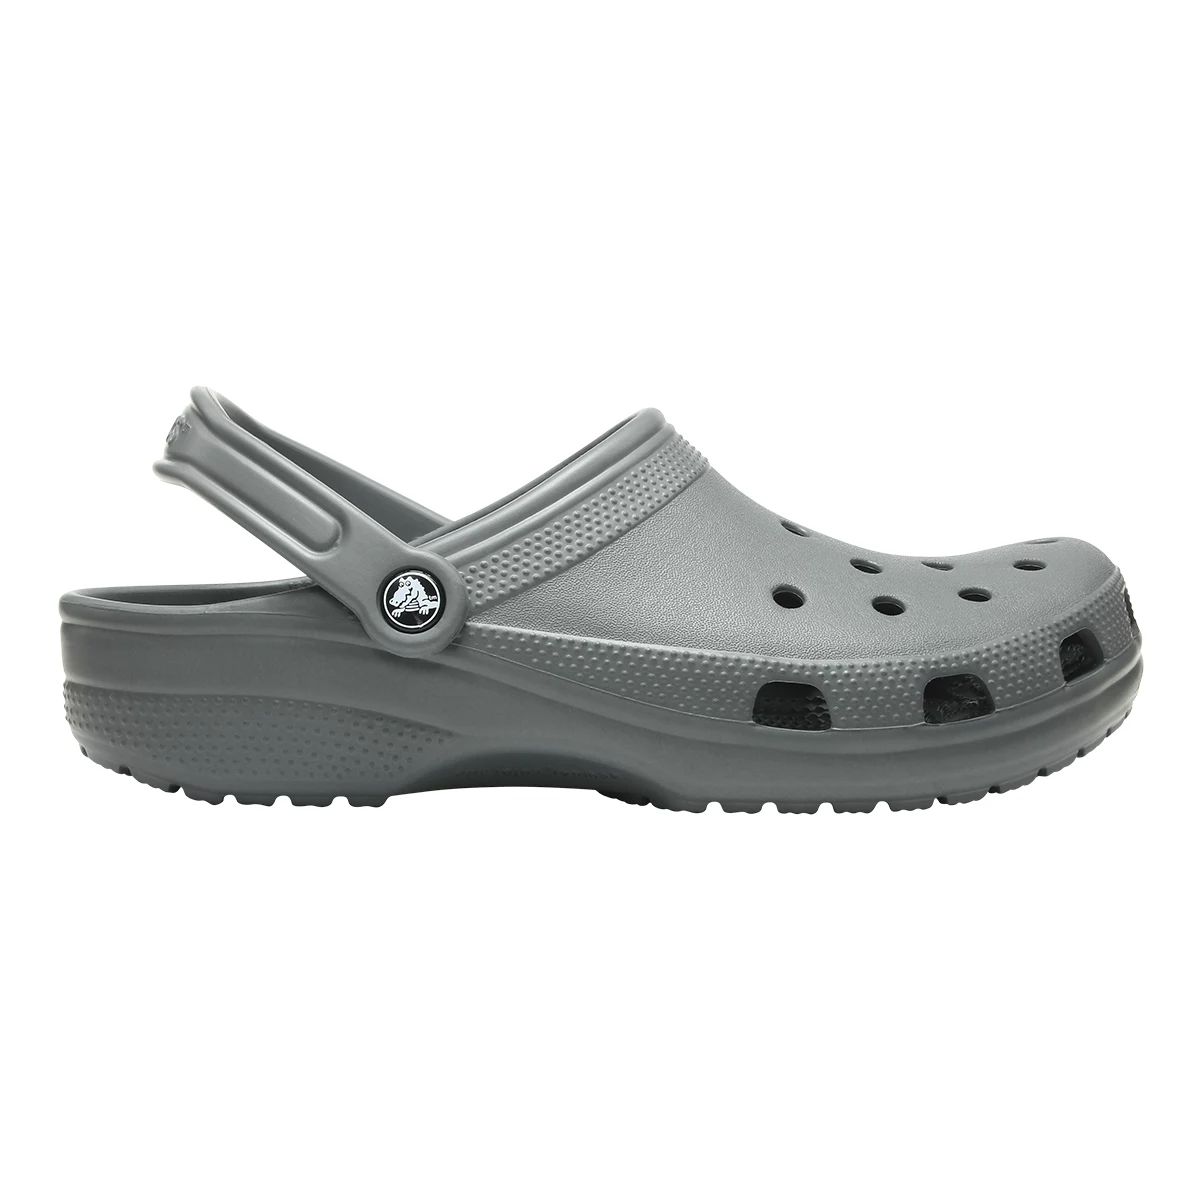 Image of Crocs Men's Classic Rotating Back Strap Comfortable Water-Resistant Clogs